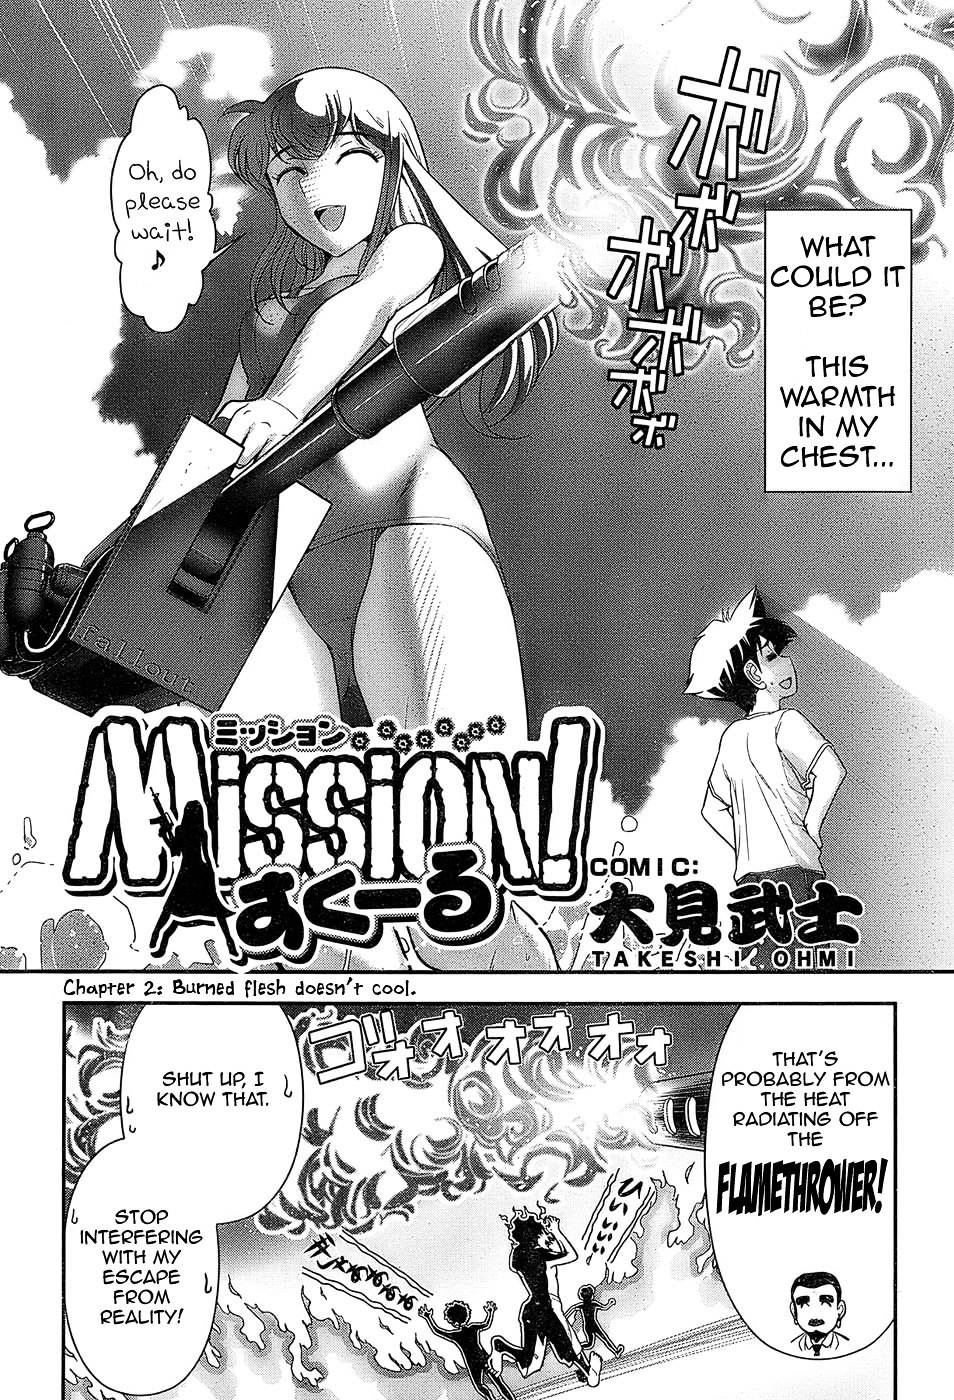 Mission! School Chapter 2 #2